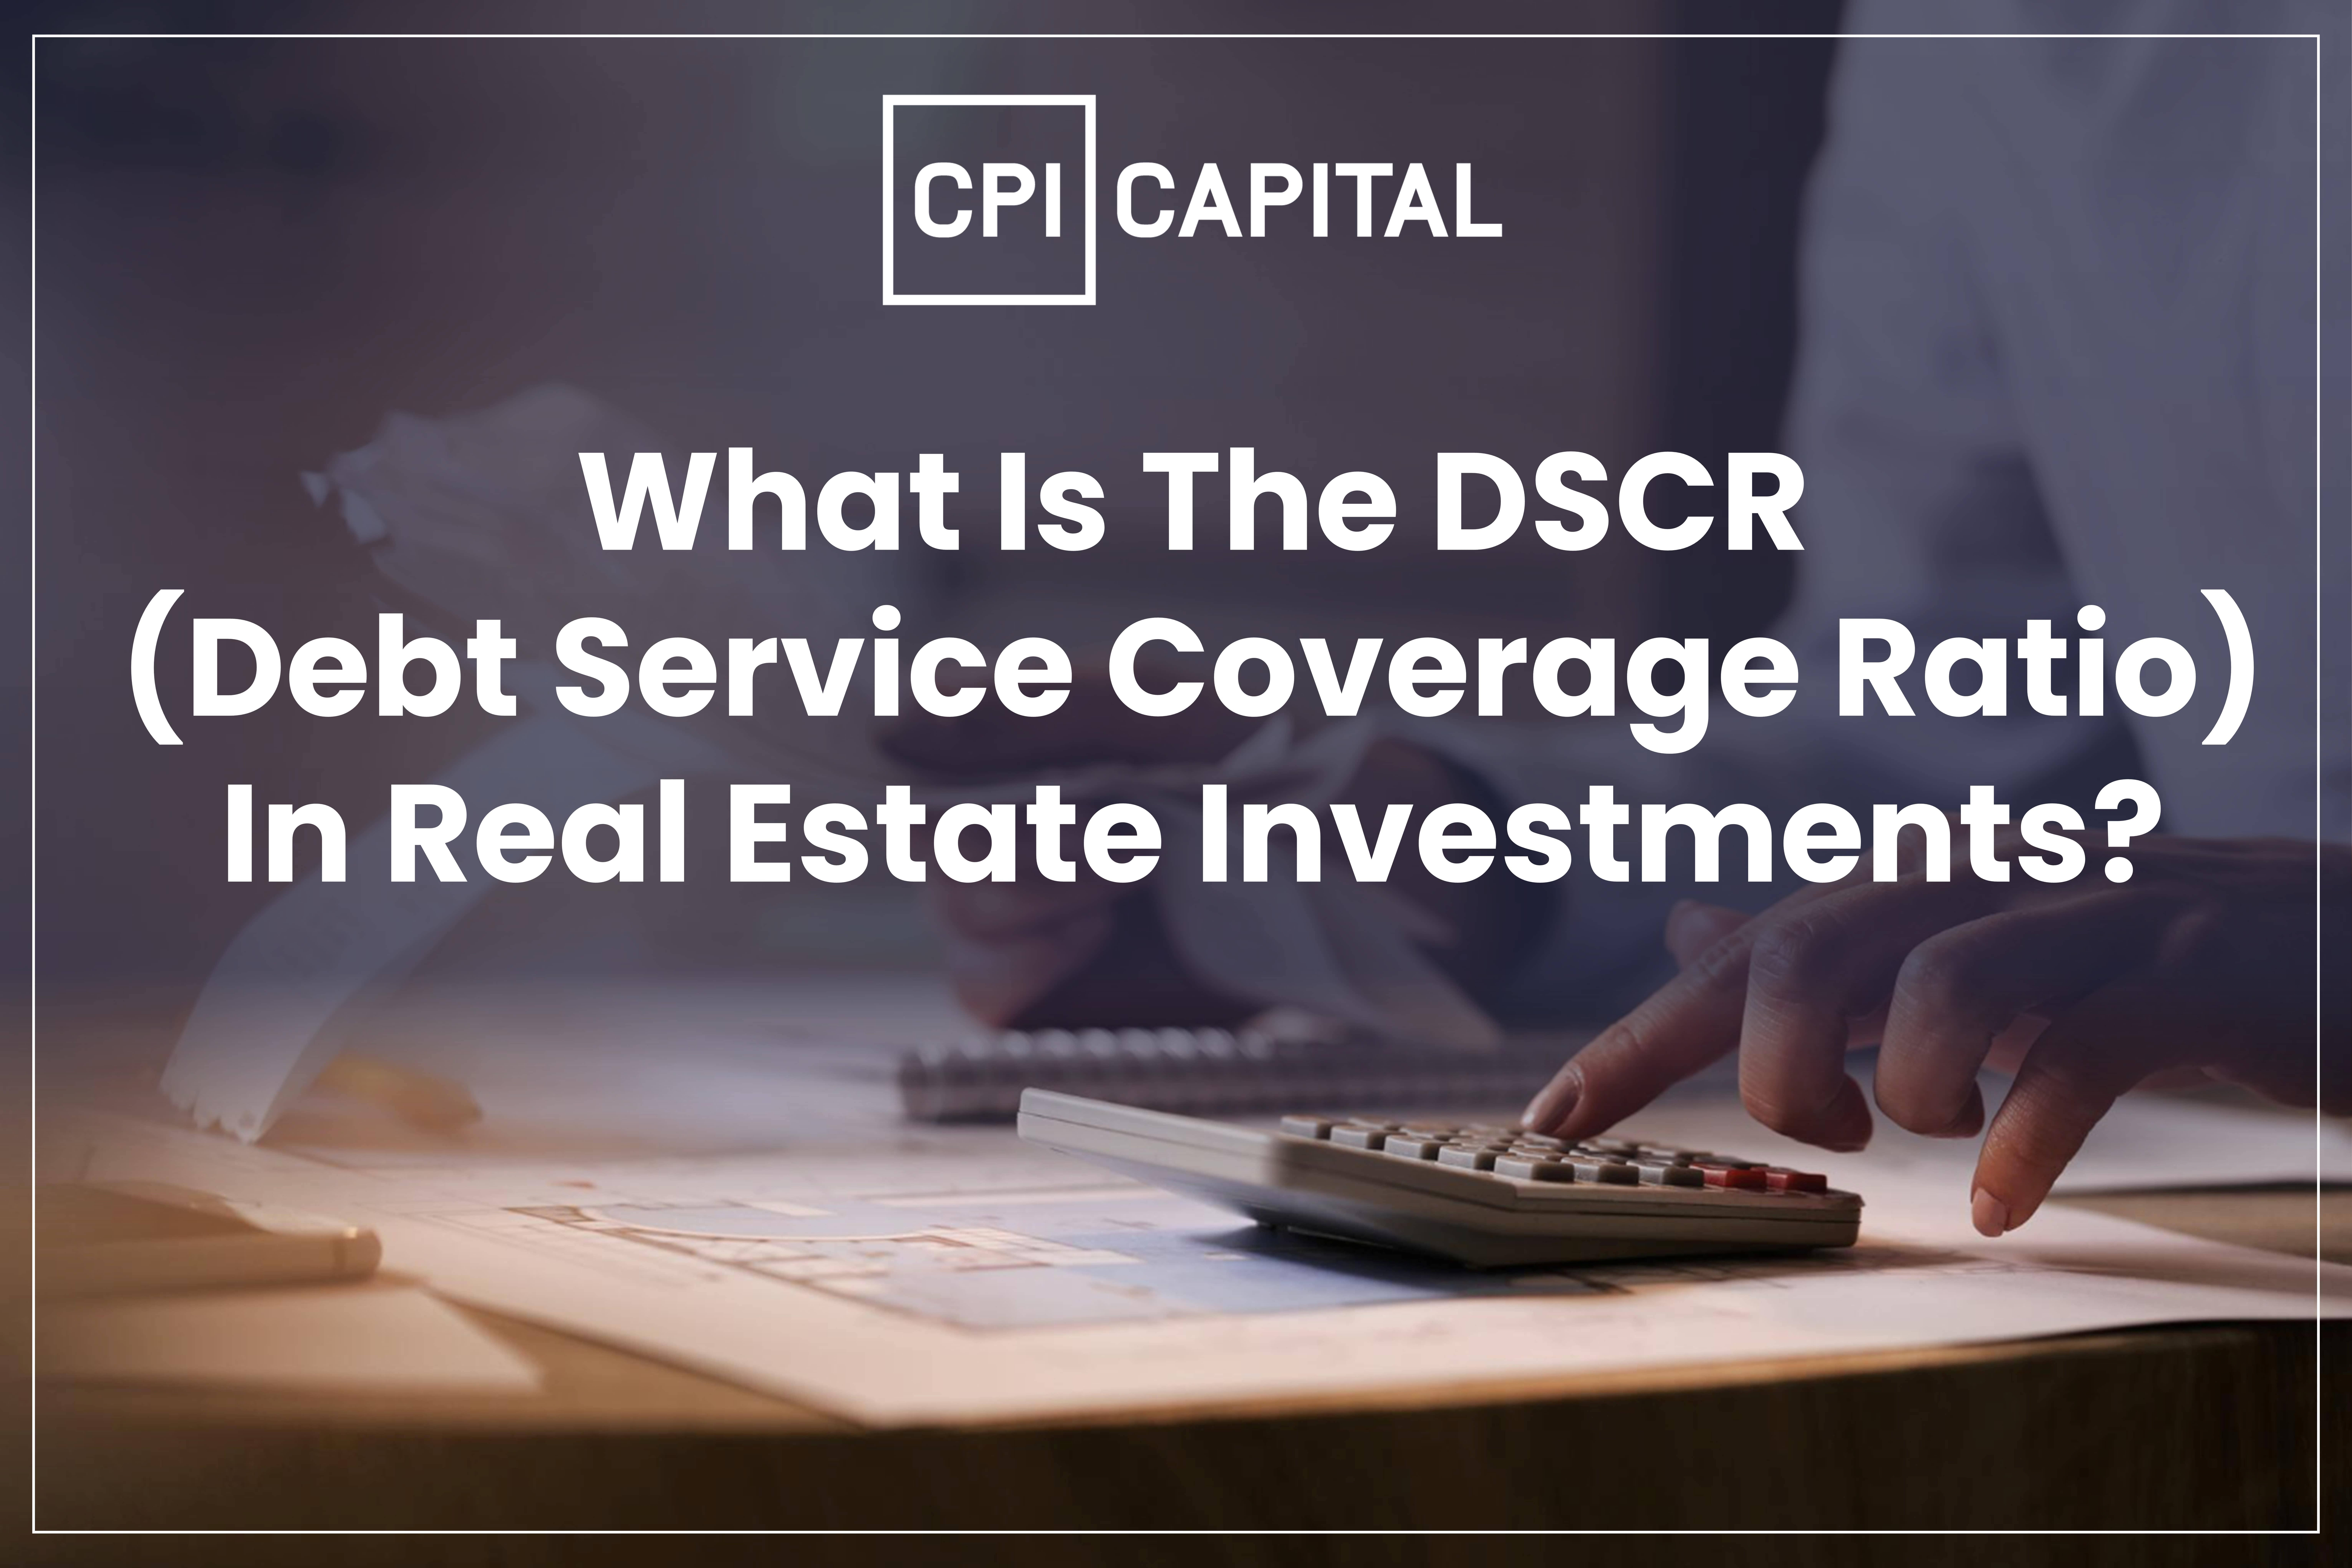 What Is The DSCR (Debt Service Coverage Ratio) In Multifamily Real Estate Investments?